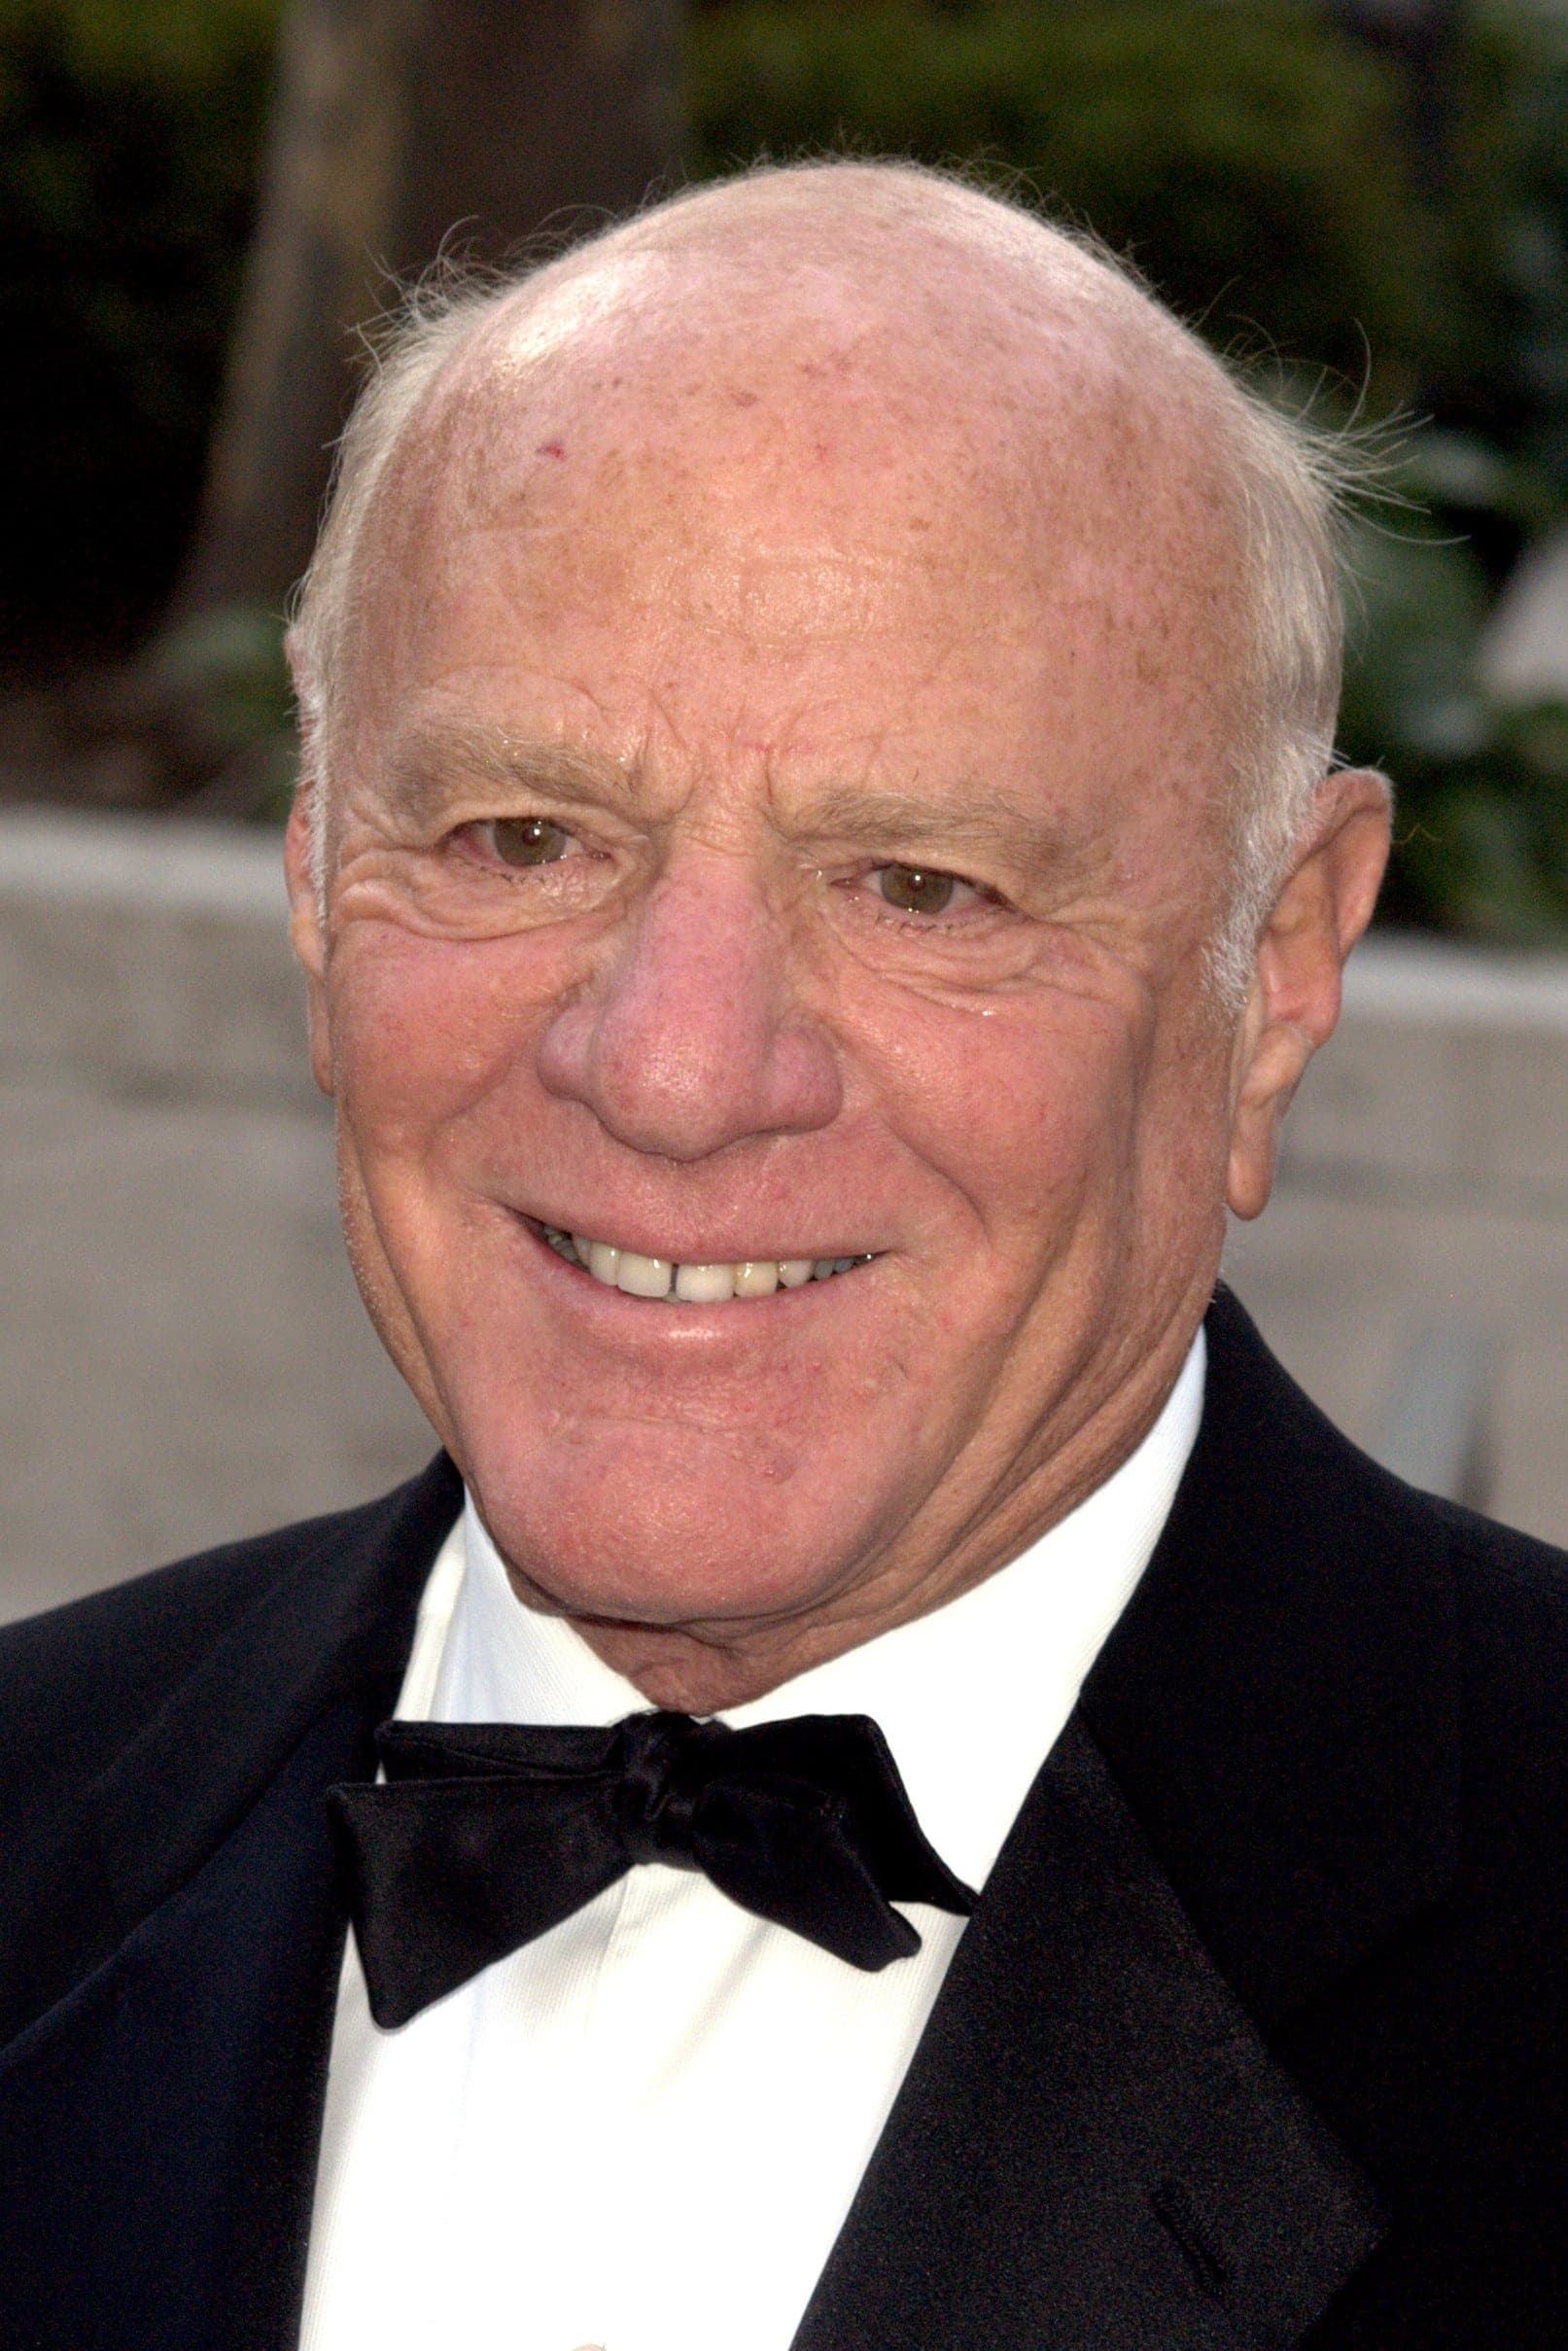 Barry Diller | Self (archive footage)